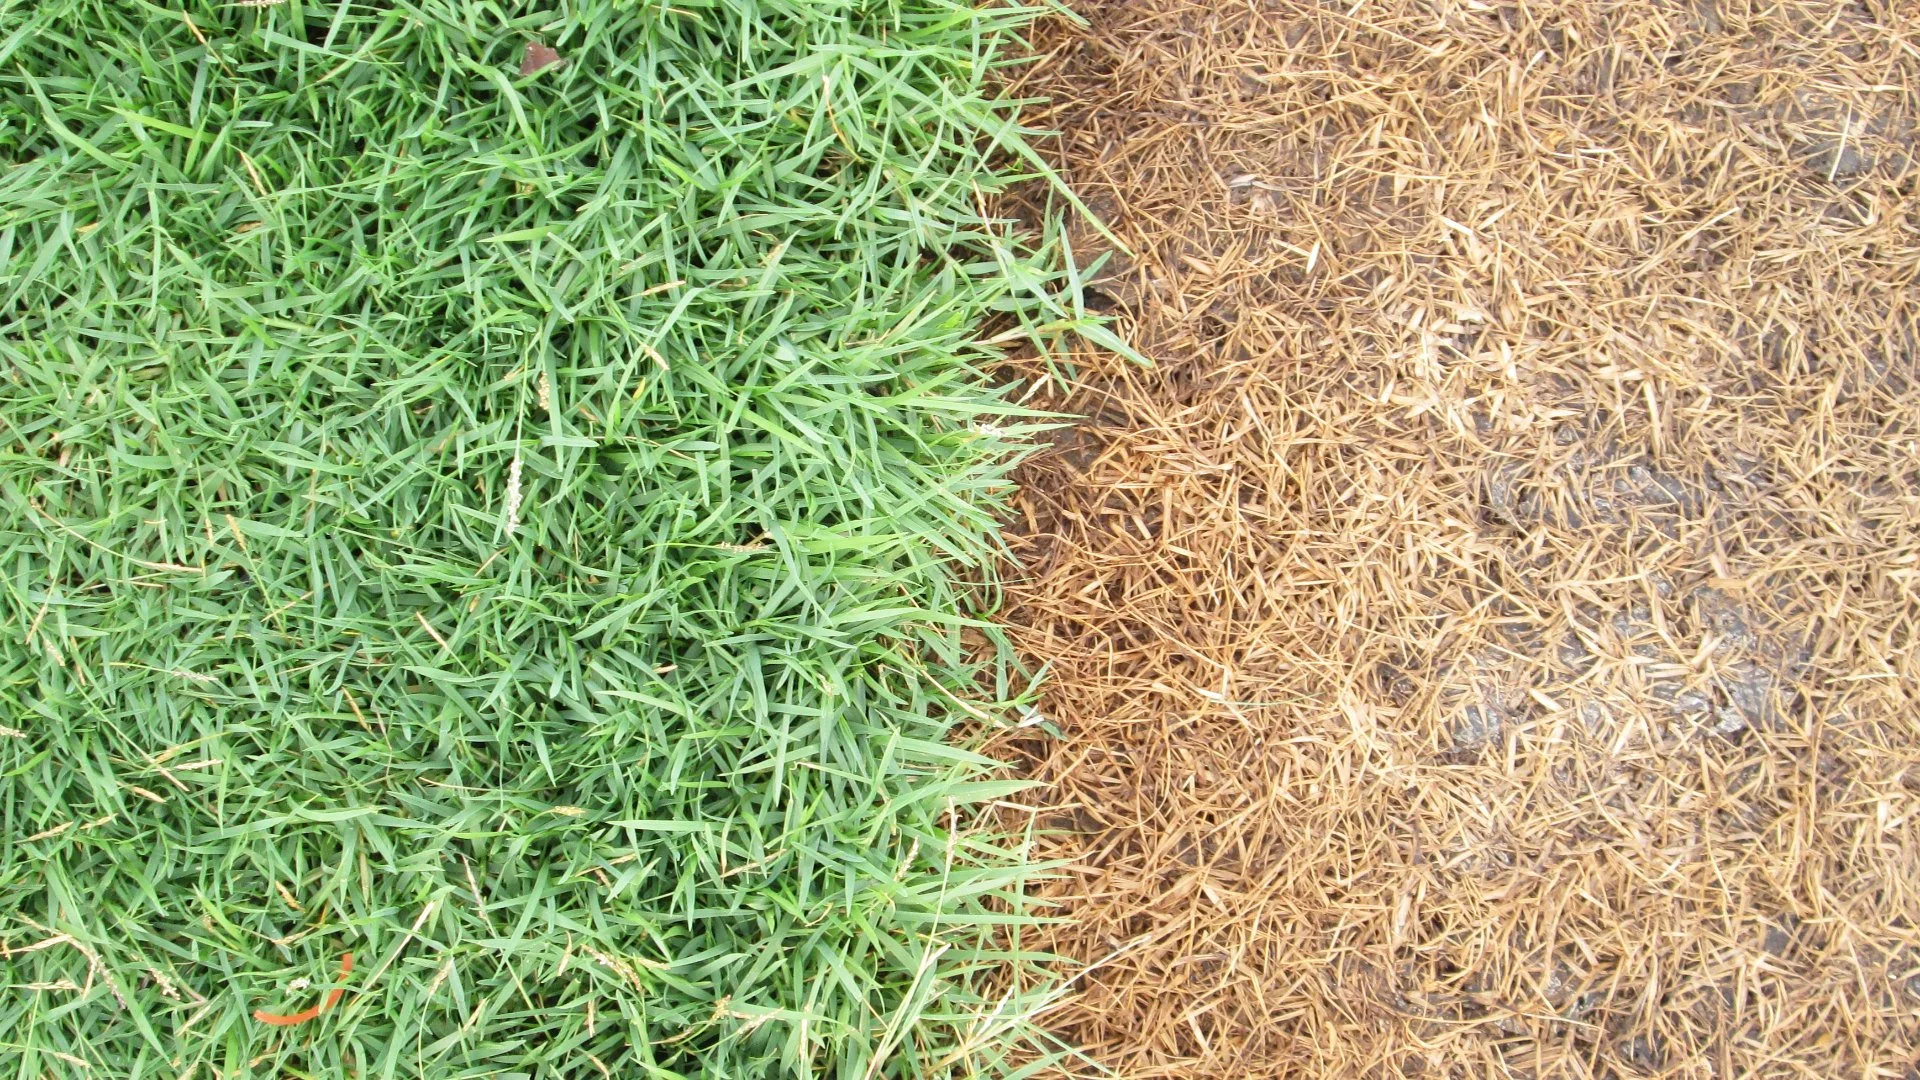 Why Is Your Lawn Brown? Turf Disease, Dehydration, or Over-Fertilization?